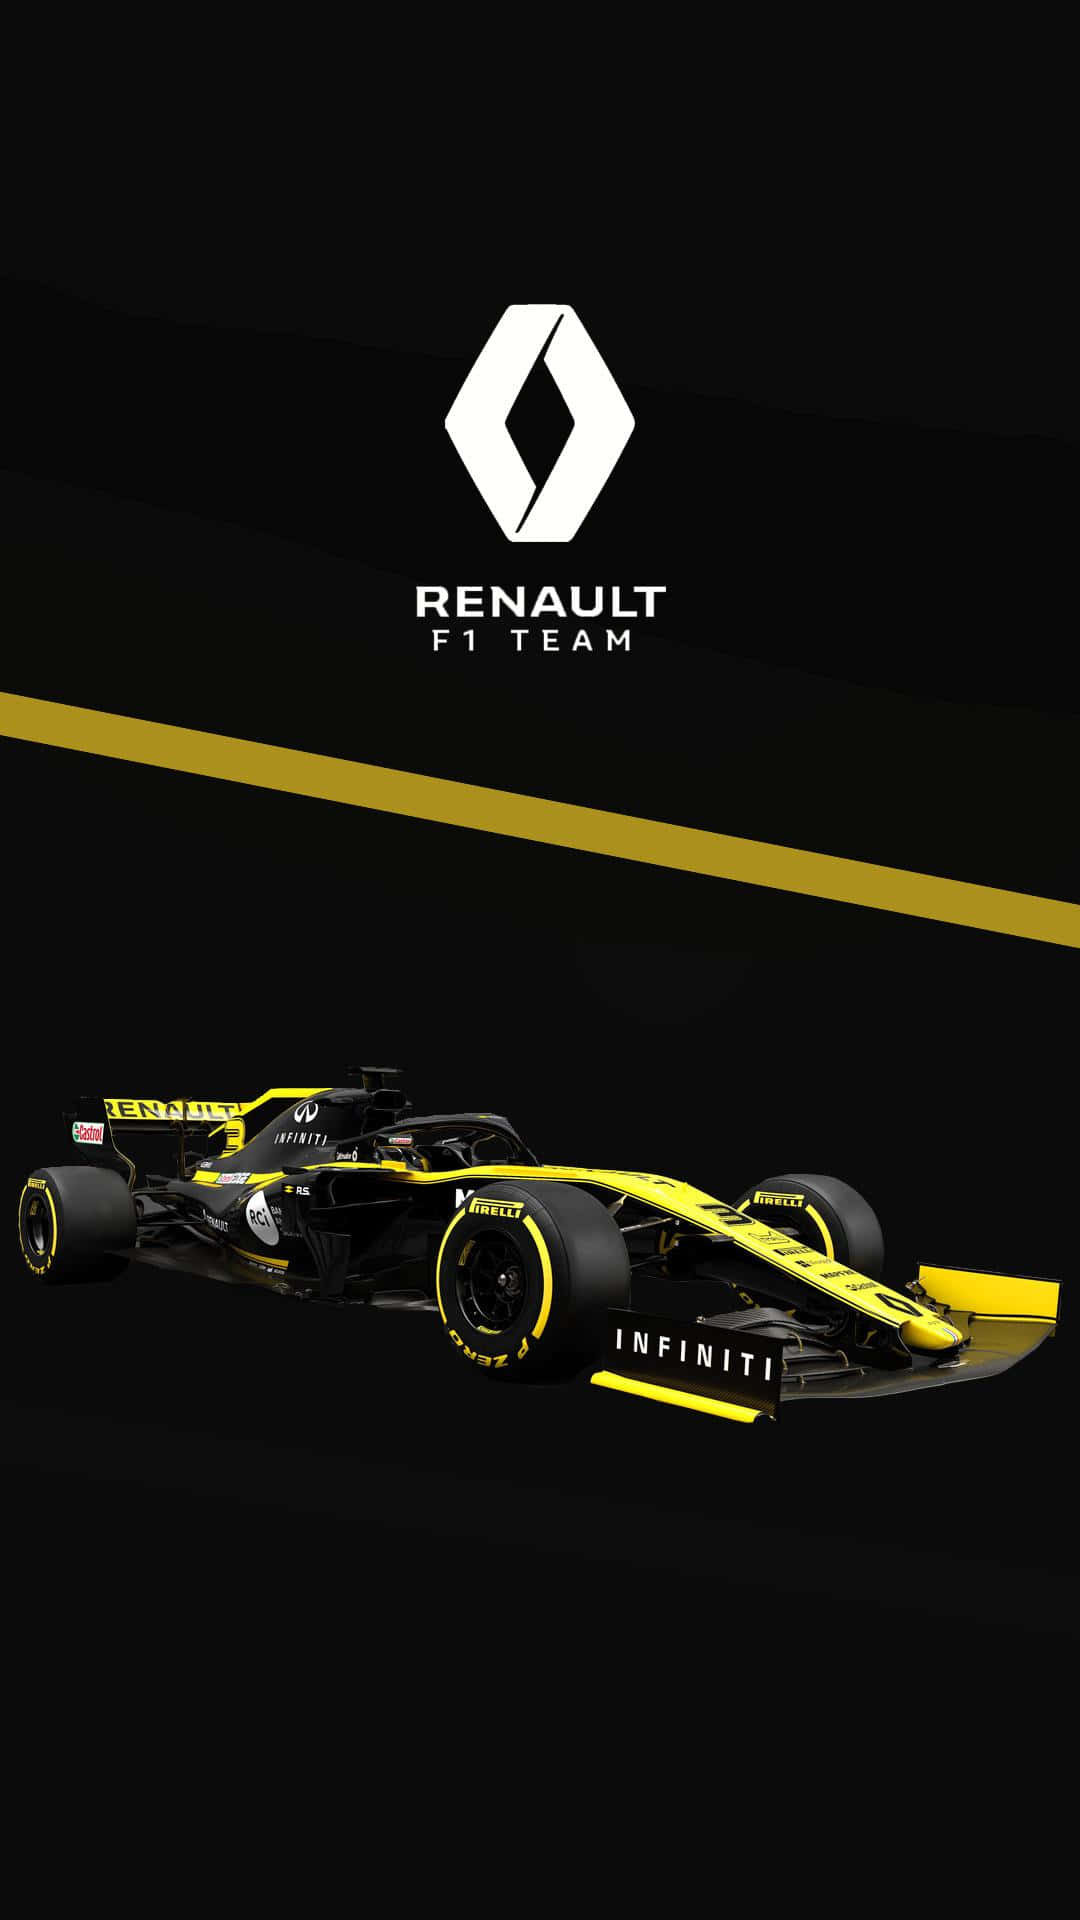 Renaultf1 Team Logo Would Be Translated To 